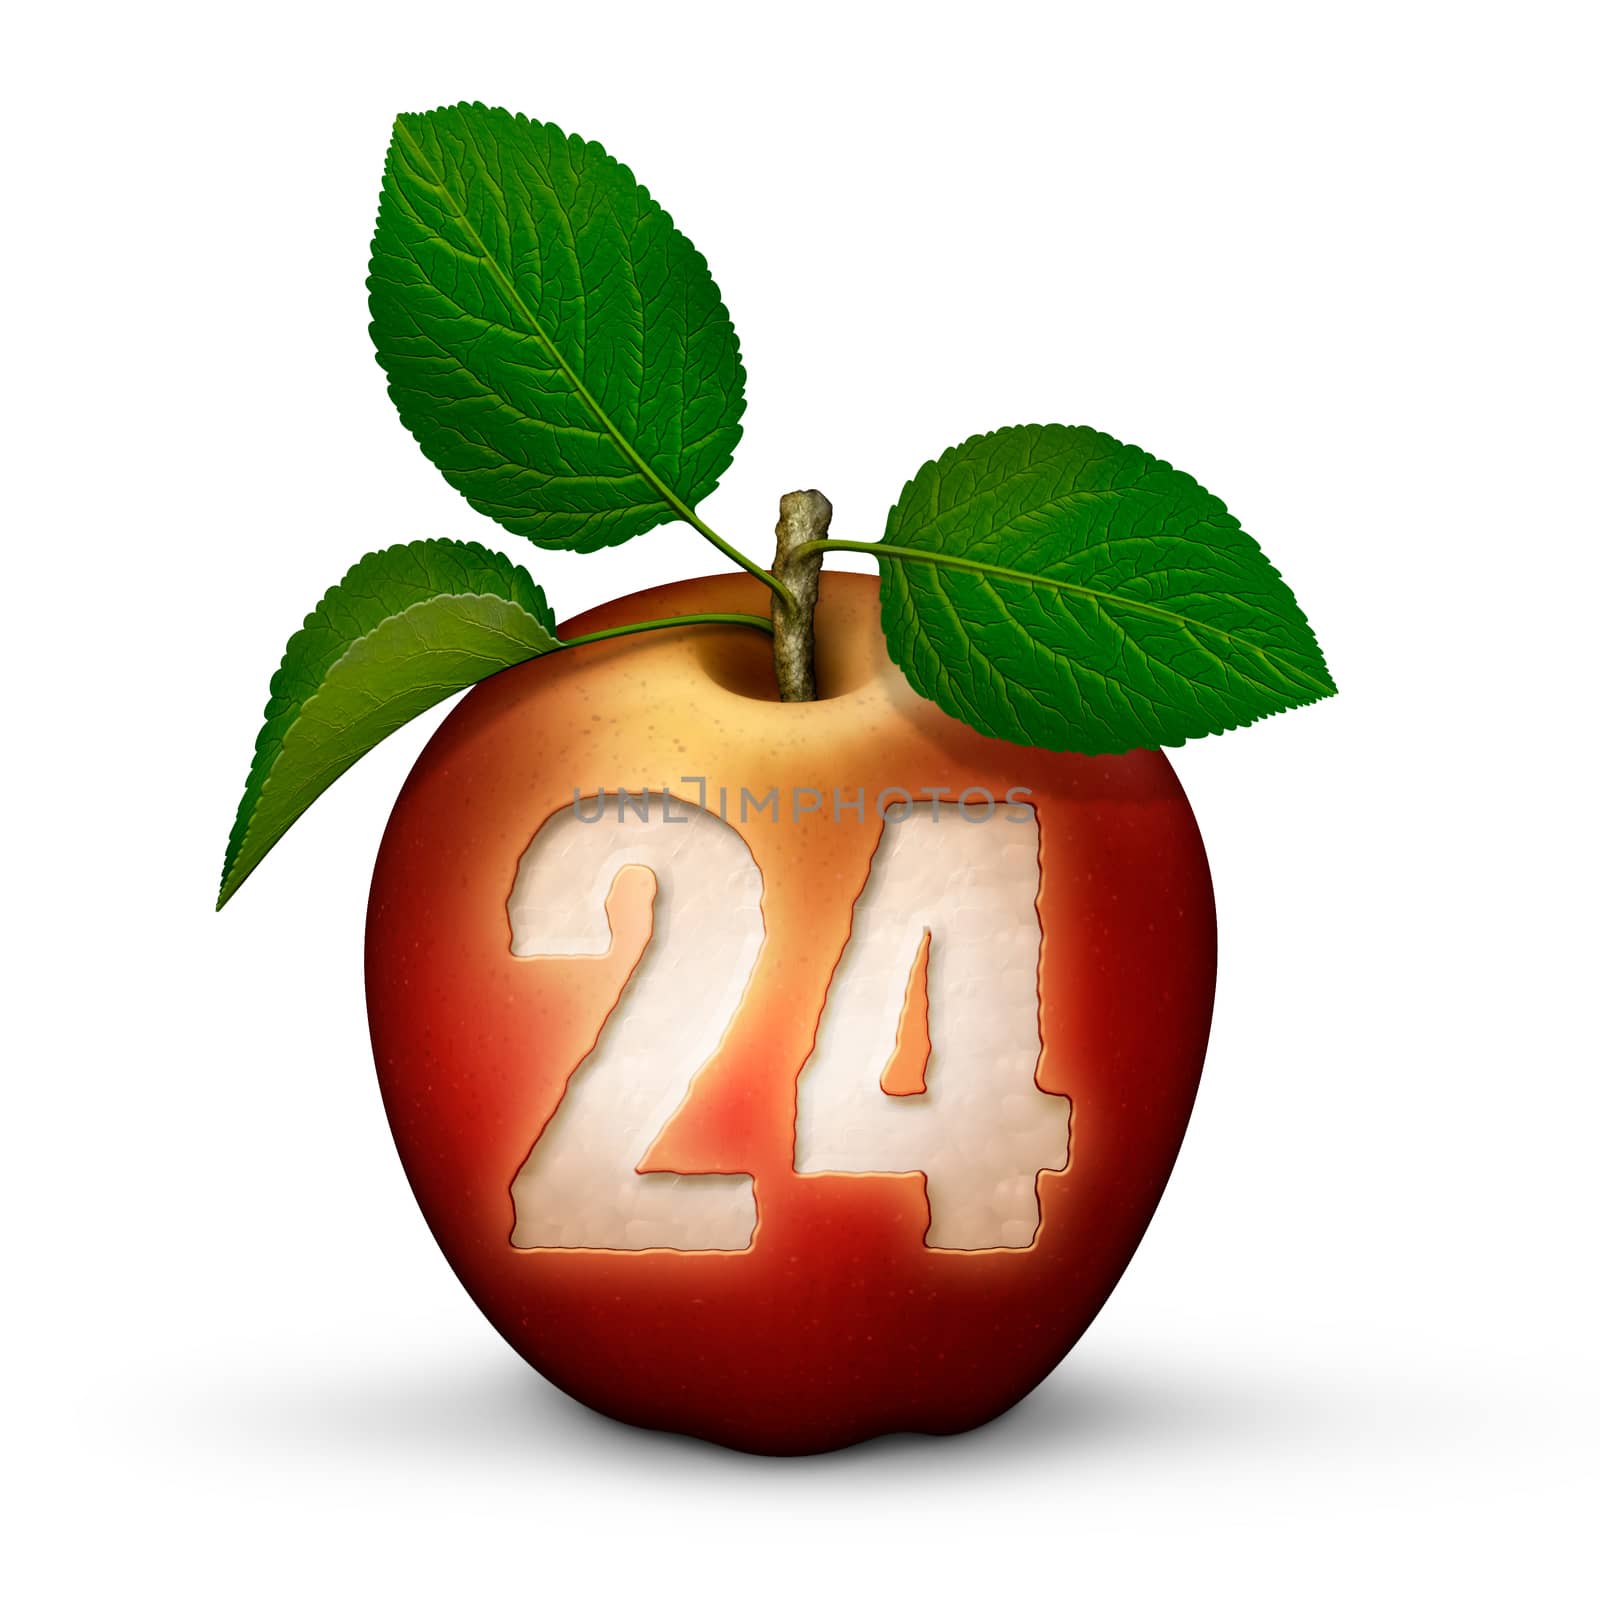 3D illustration of an apple with the number 24 bitten out of it.